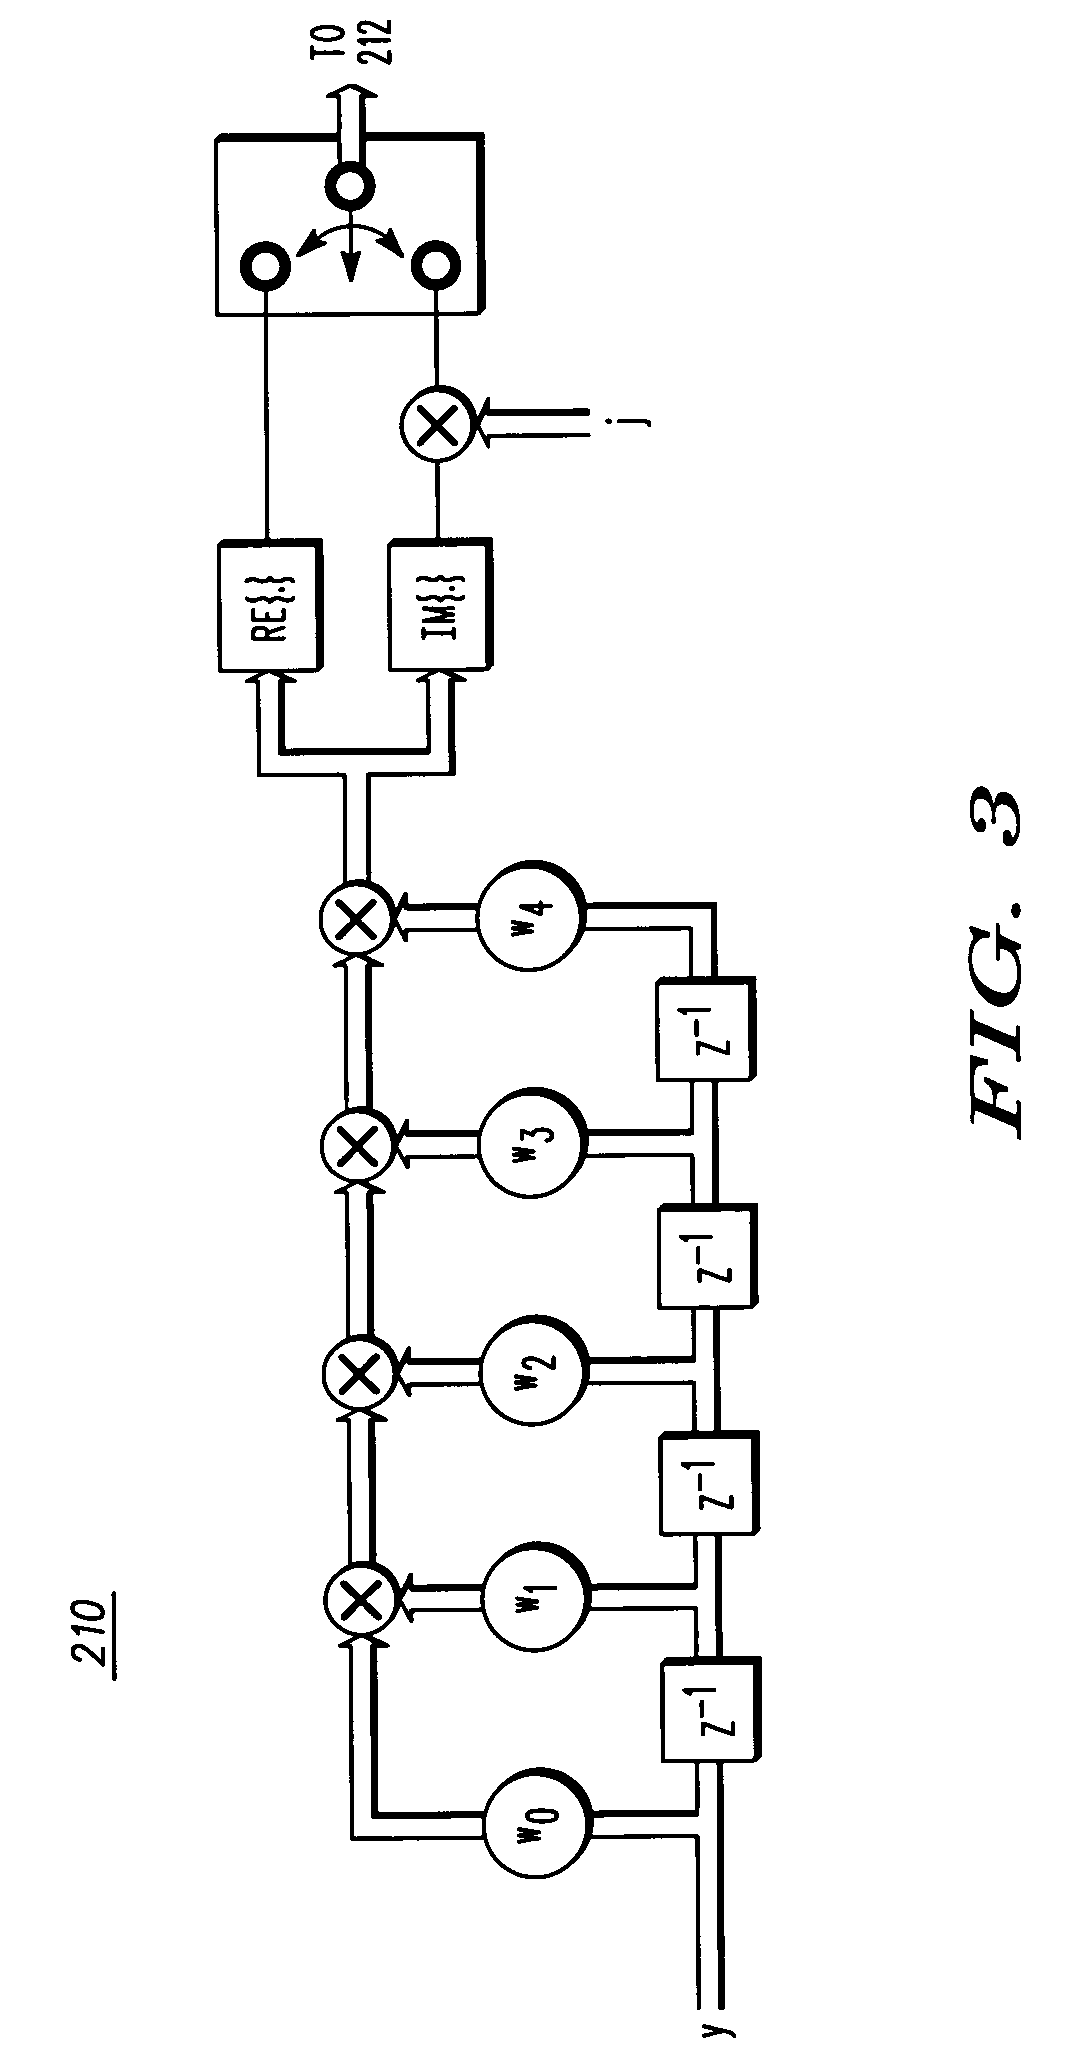 Multi-pass interference reduction in a GSM communication system